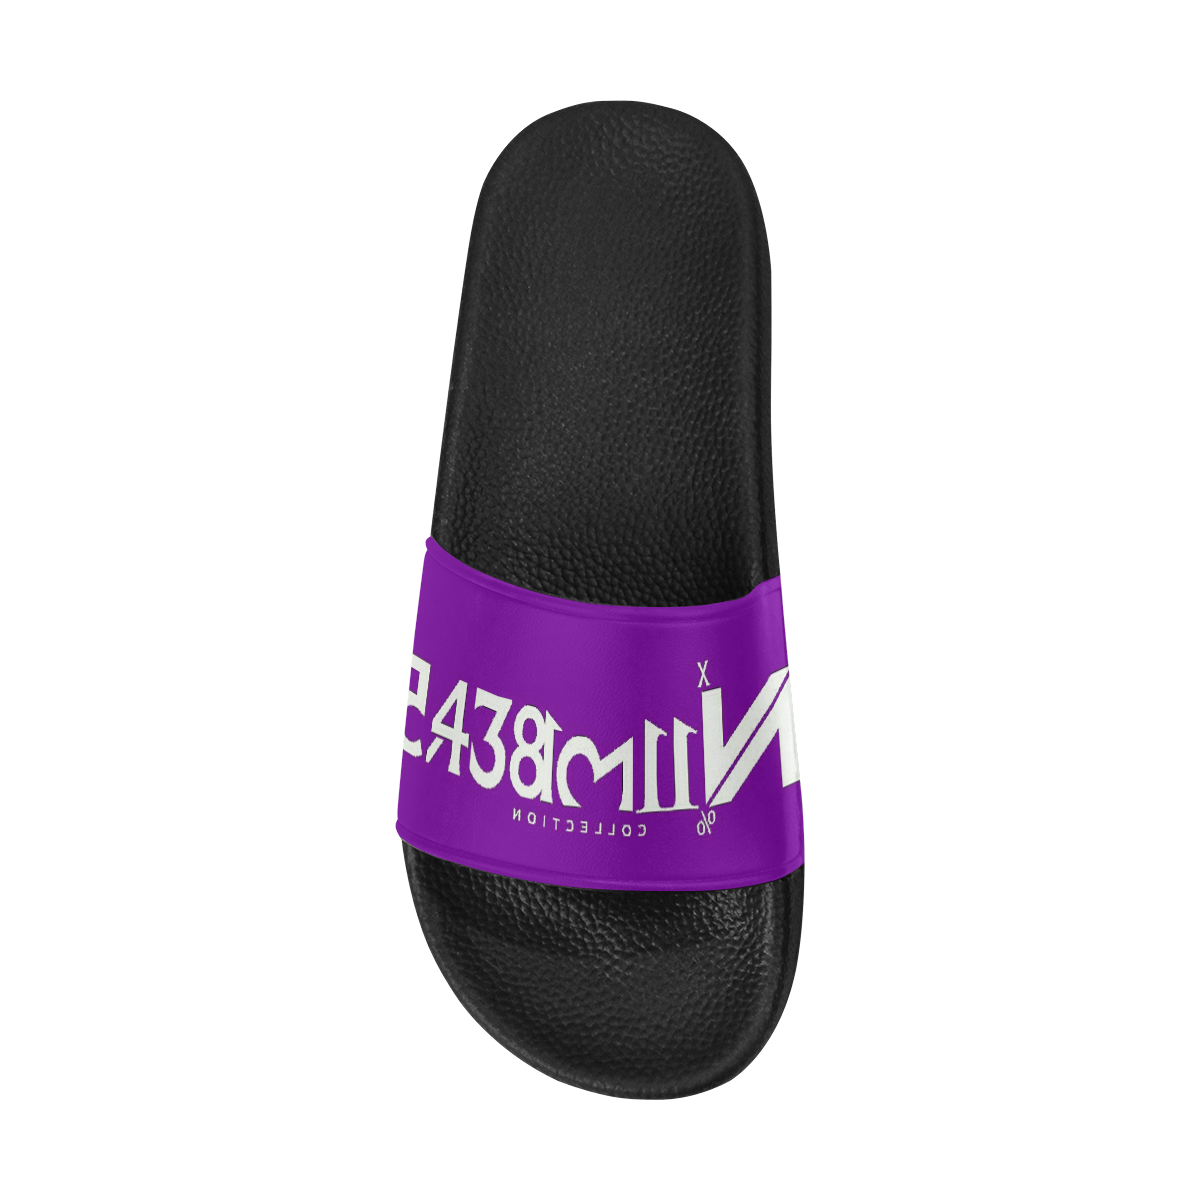 NUMBERS Collection White/Purple Men's Slide Sandals (Model 057)